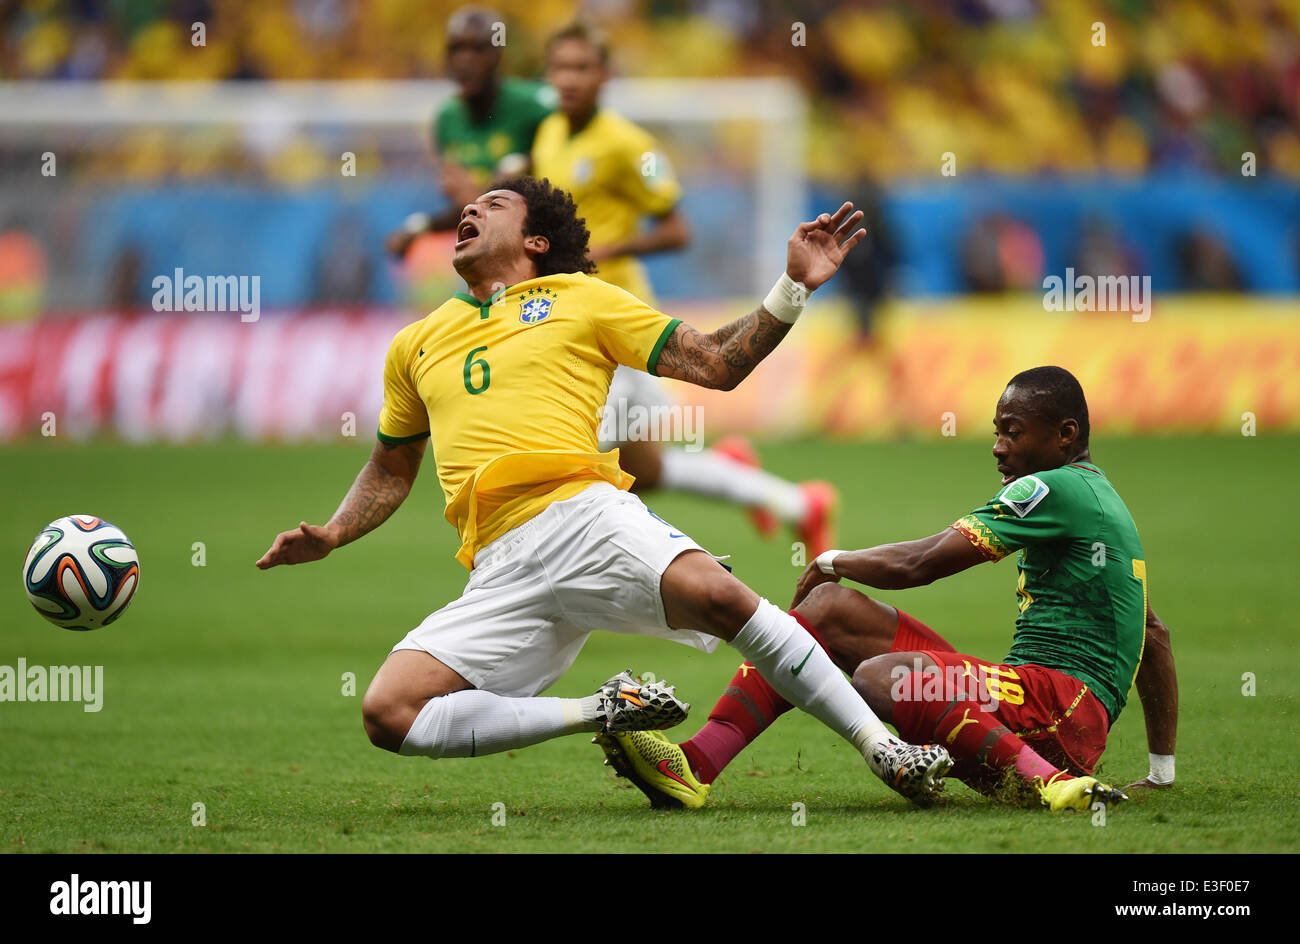 Brasilia, Brazil. 23rd June, 2014. Cameroon's Eyong Enoh (R) vies for the ball with Marcelo of Brazil during the FIFA World Cup 2014 group A preliminary round match between Cameroon and Brazil at the Estadio Nacional in Brasilia, Brazil, 23 June 2014. Photo: Marius Becker/dpa/Alamy Live News Stock Photo